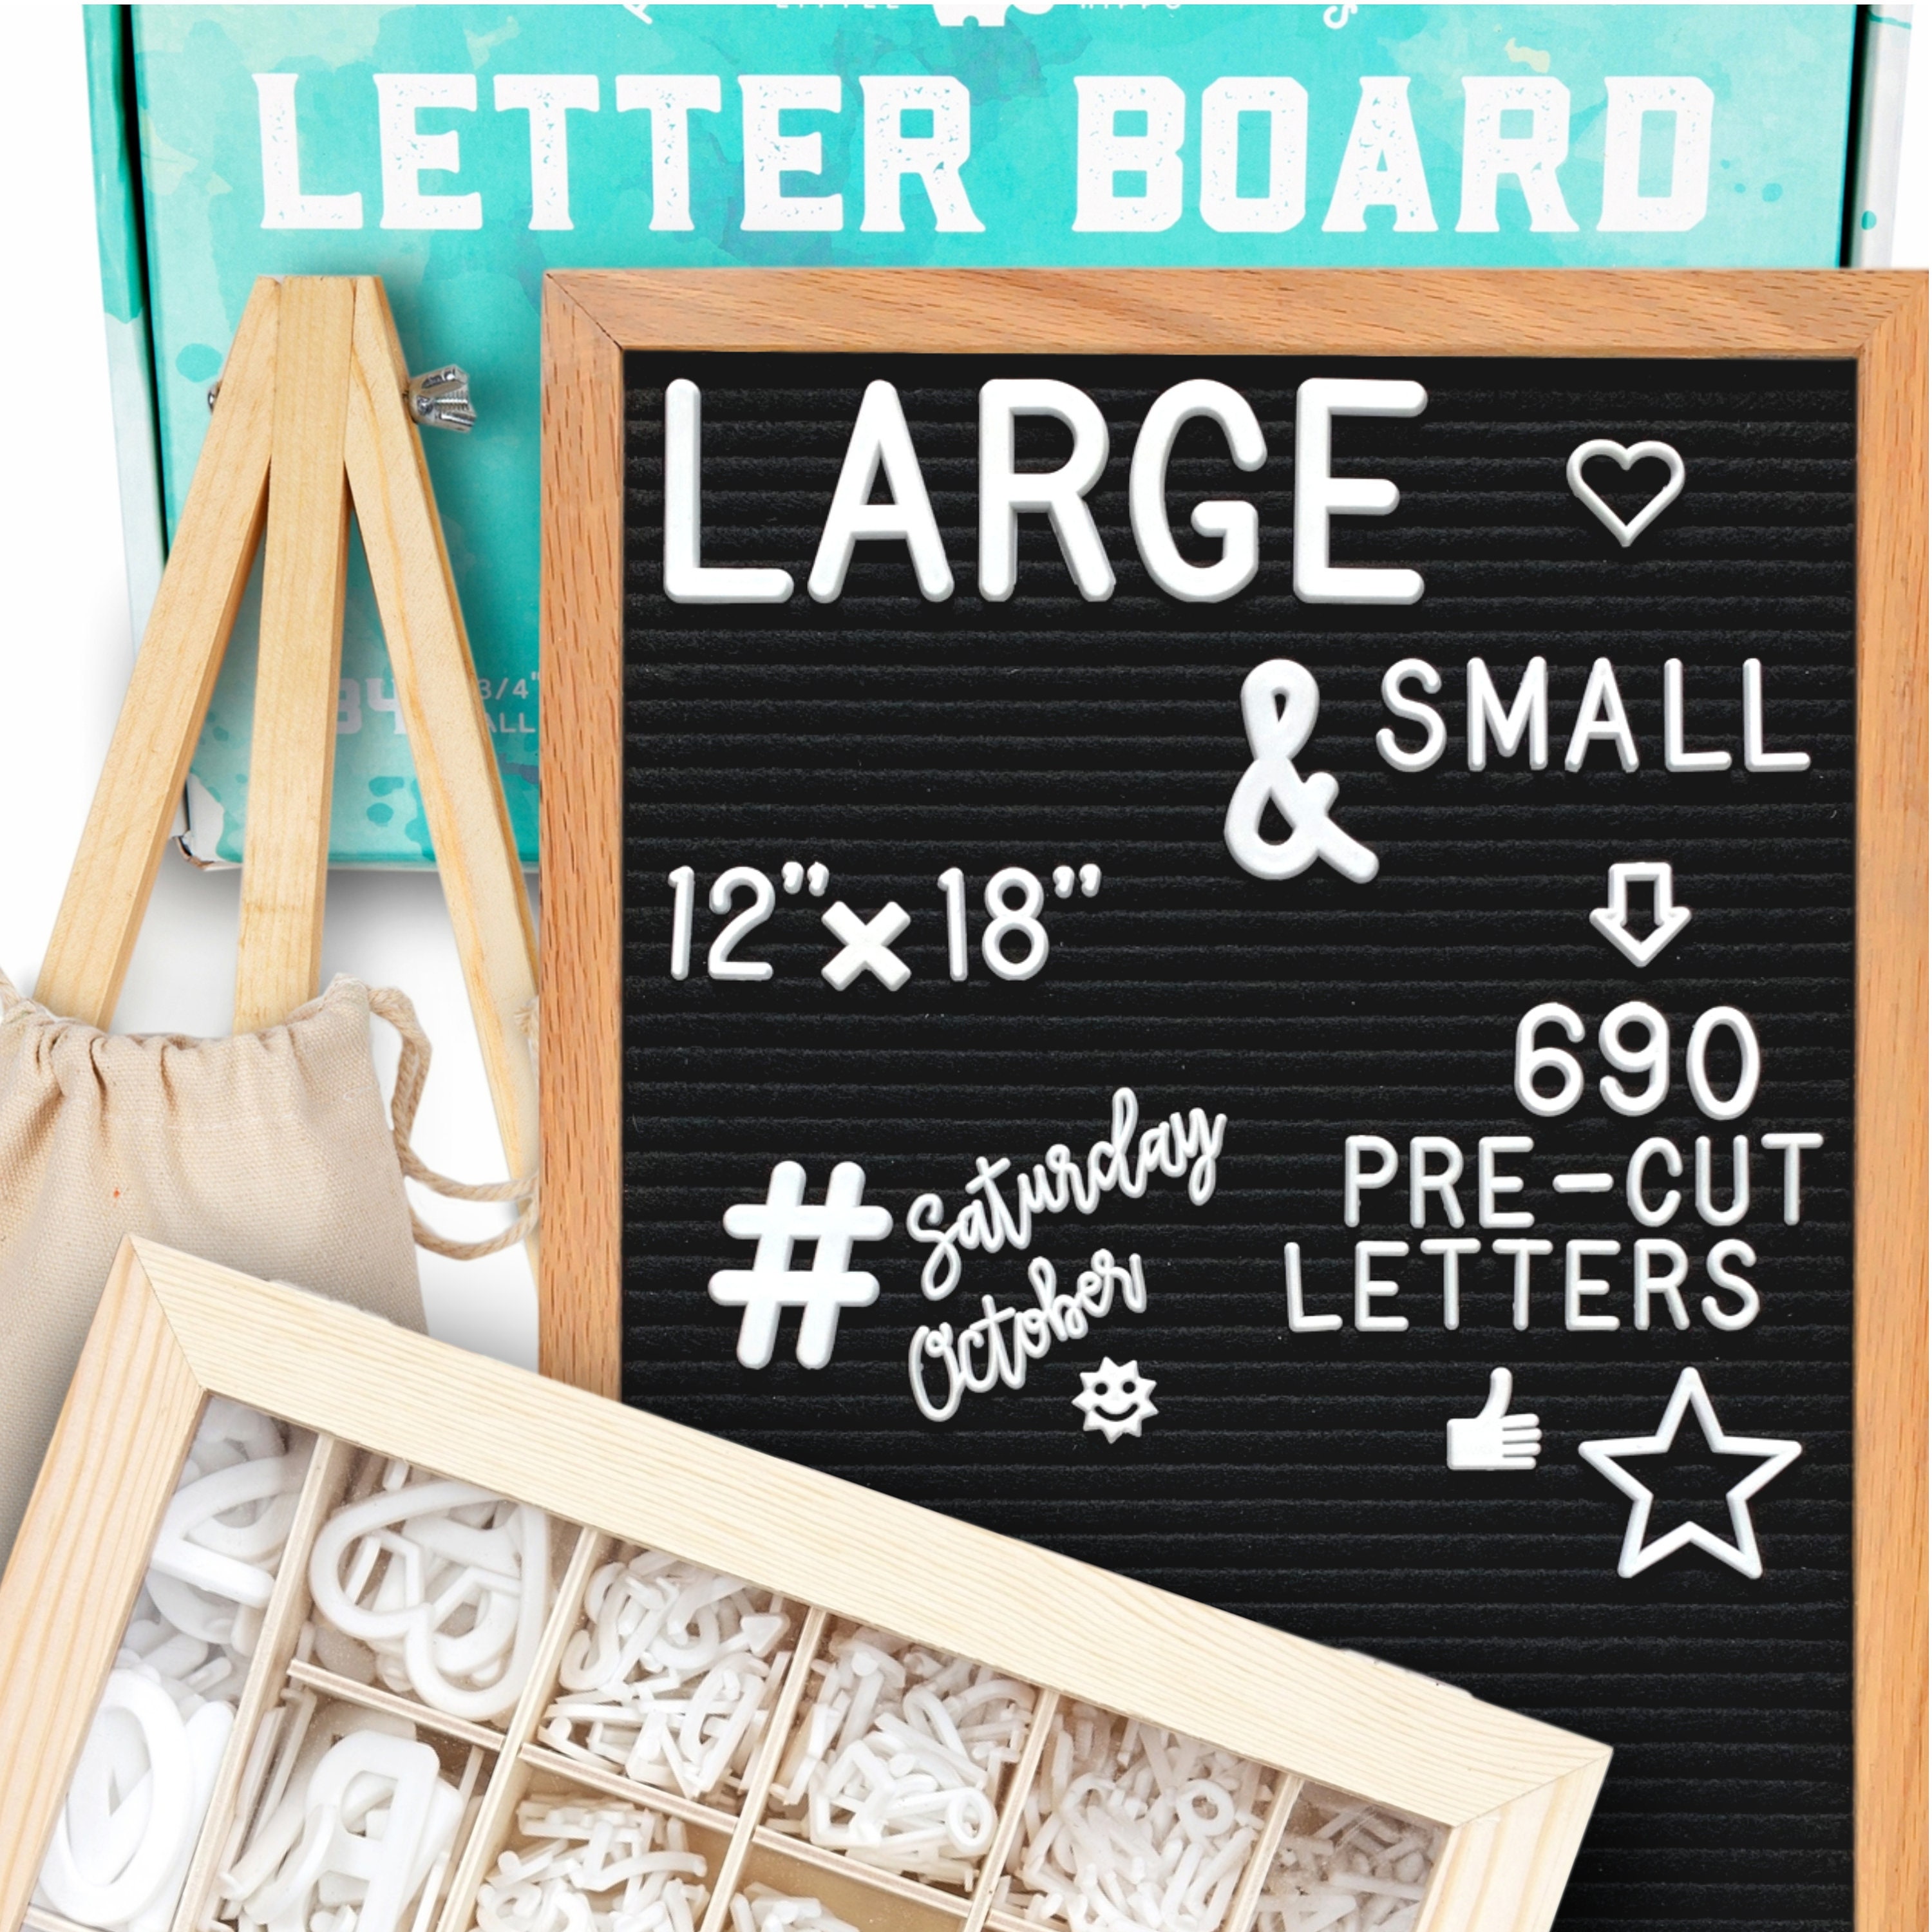 Word Message Board Changeable Letter Sign Gray Felt Letter Board 10x10 inches 510 Letters and Storage Bag Included Solid Oak Frame 